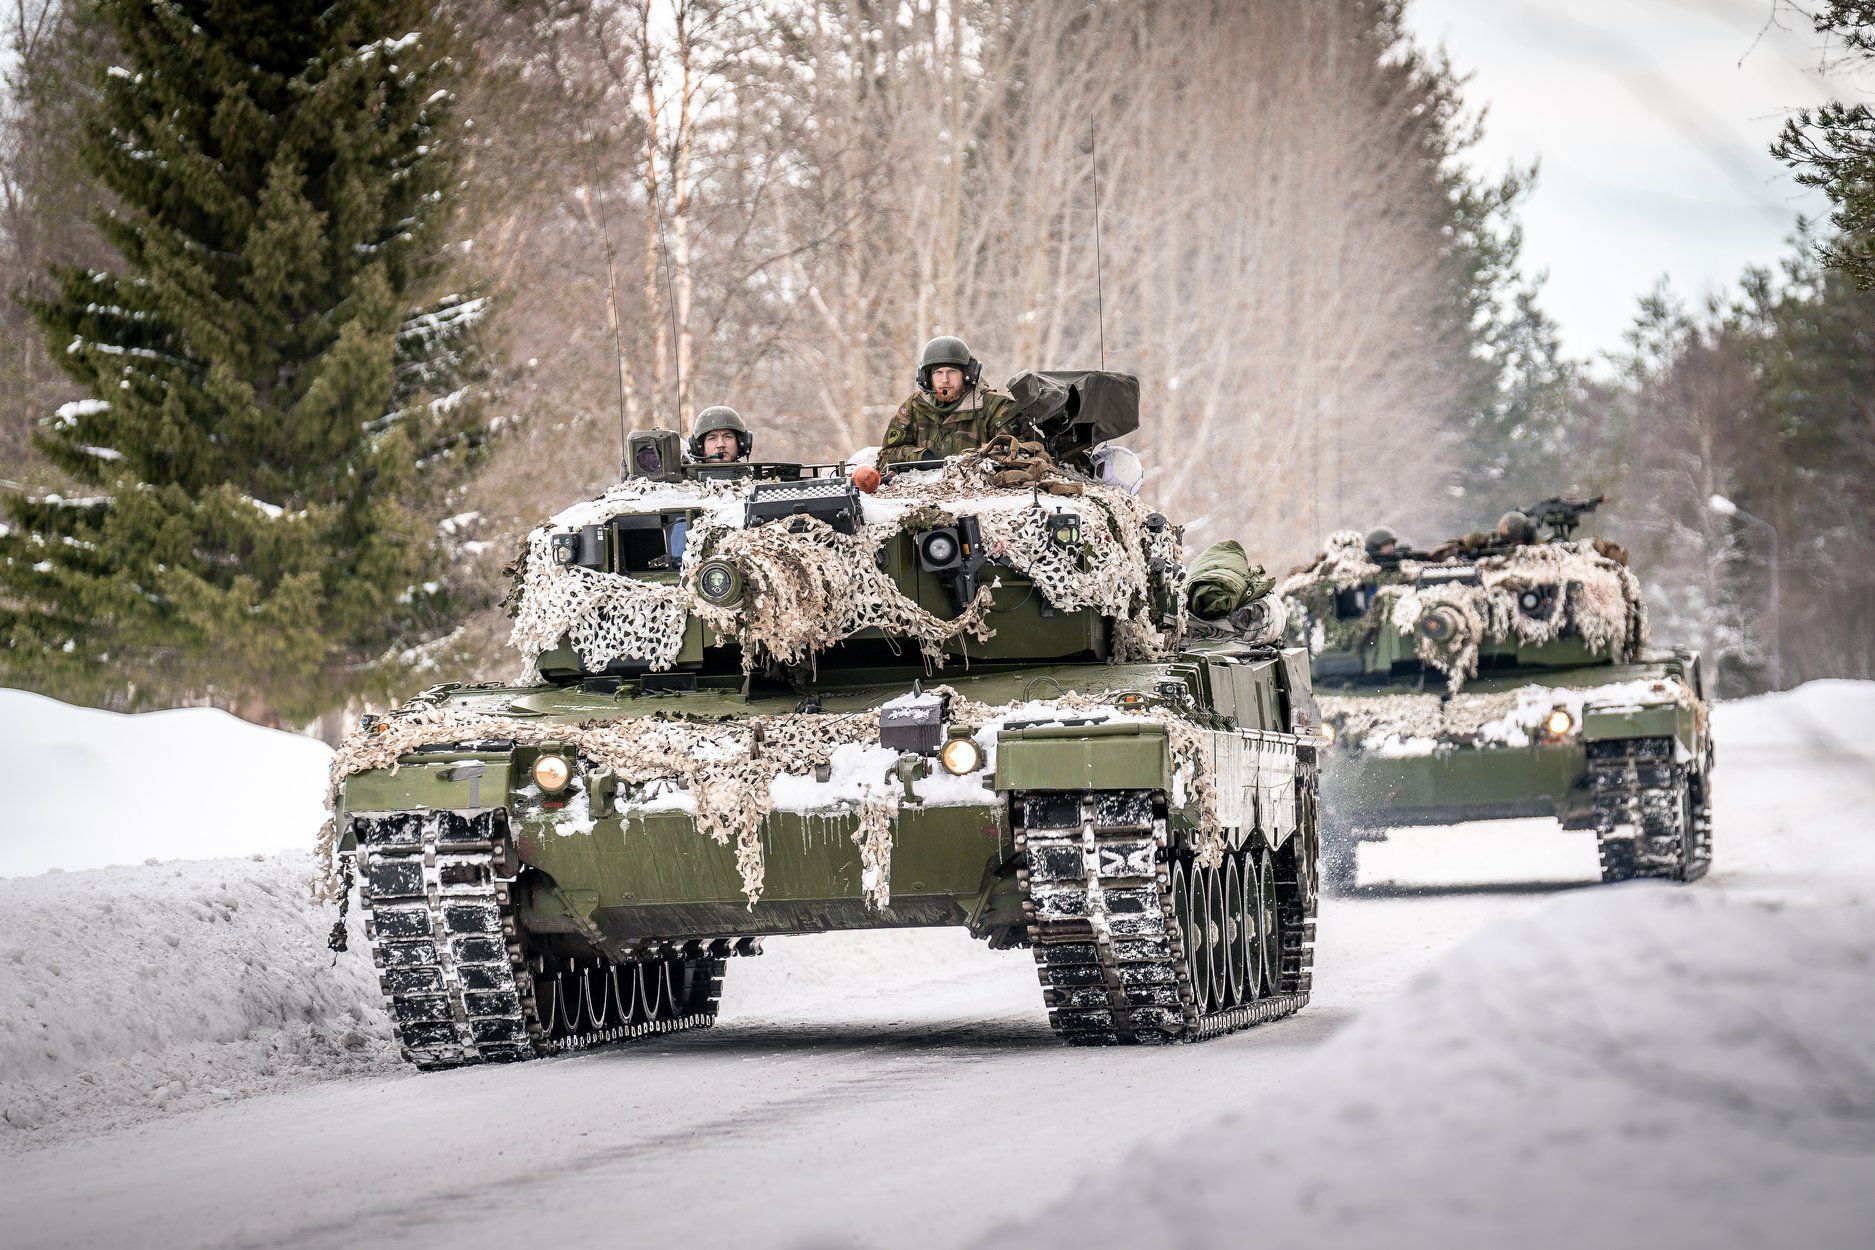 Norway Acquire 54 Leopard 2A7 MBTs to Replace Its Ageing Tank Fleet